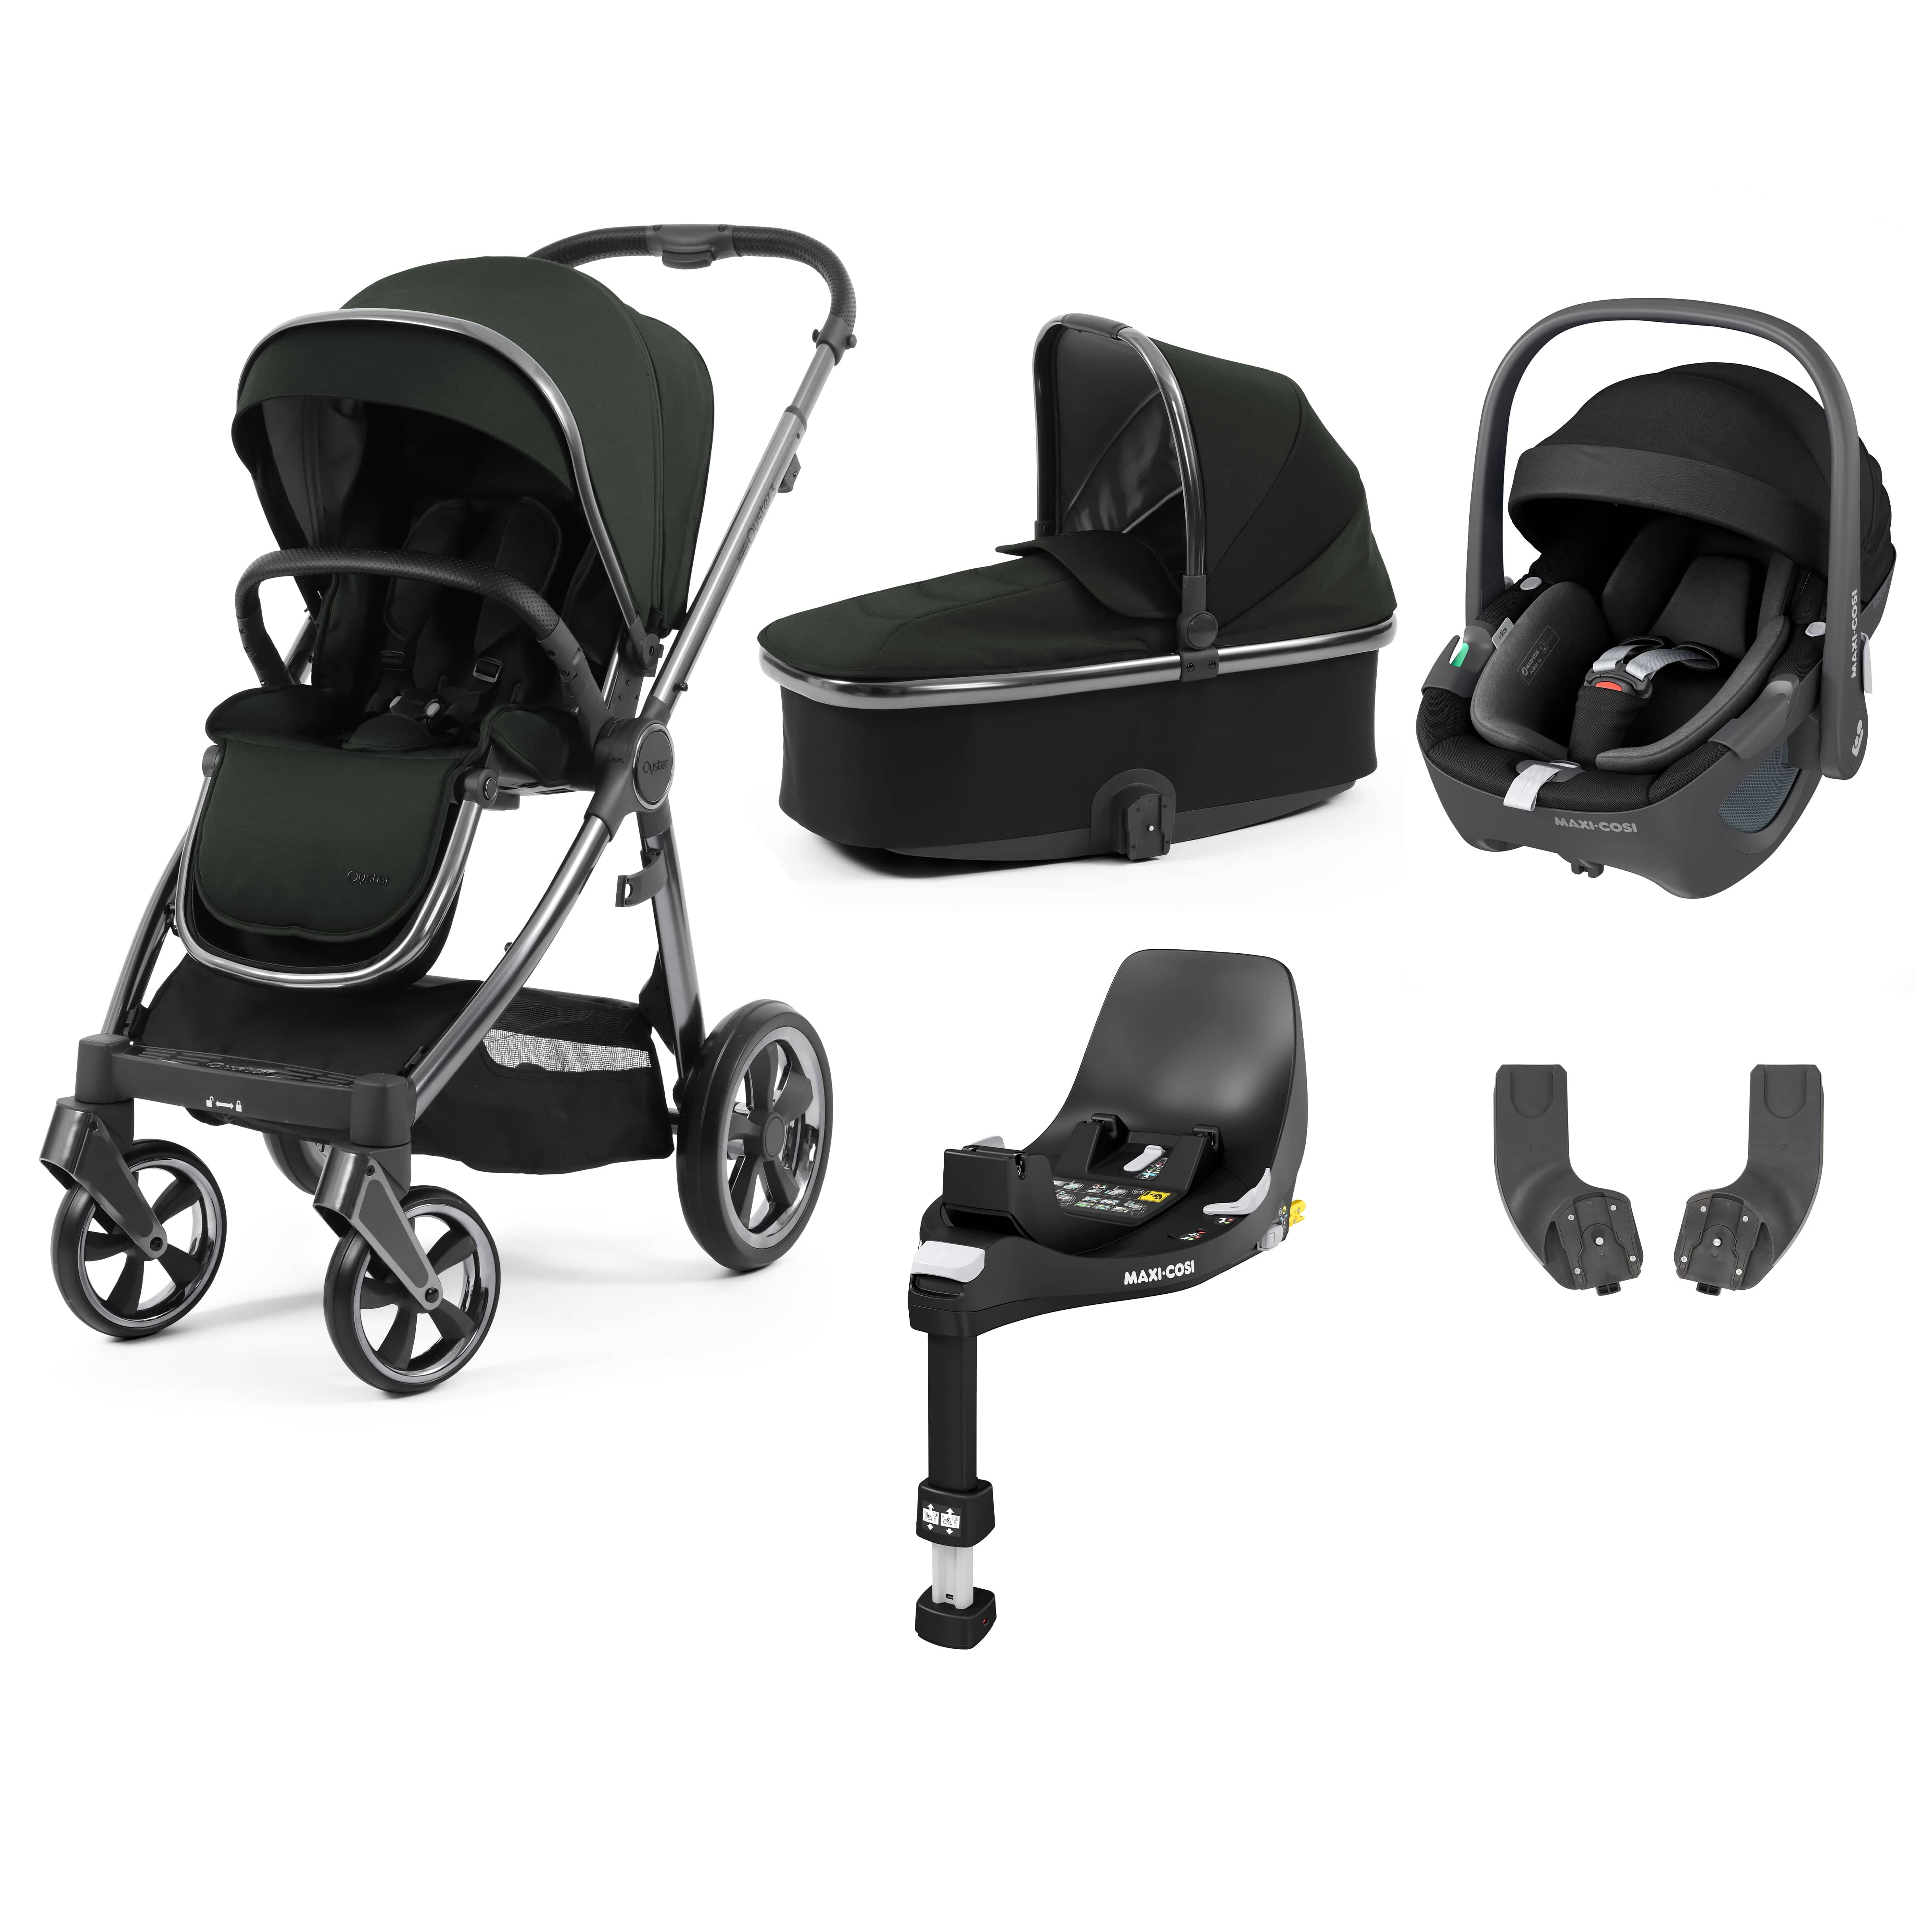 Babystyle Oyster 3 Essential Bundle with Car Seat in Black Olive Travel Systems